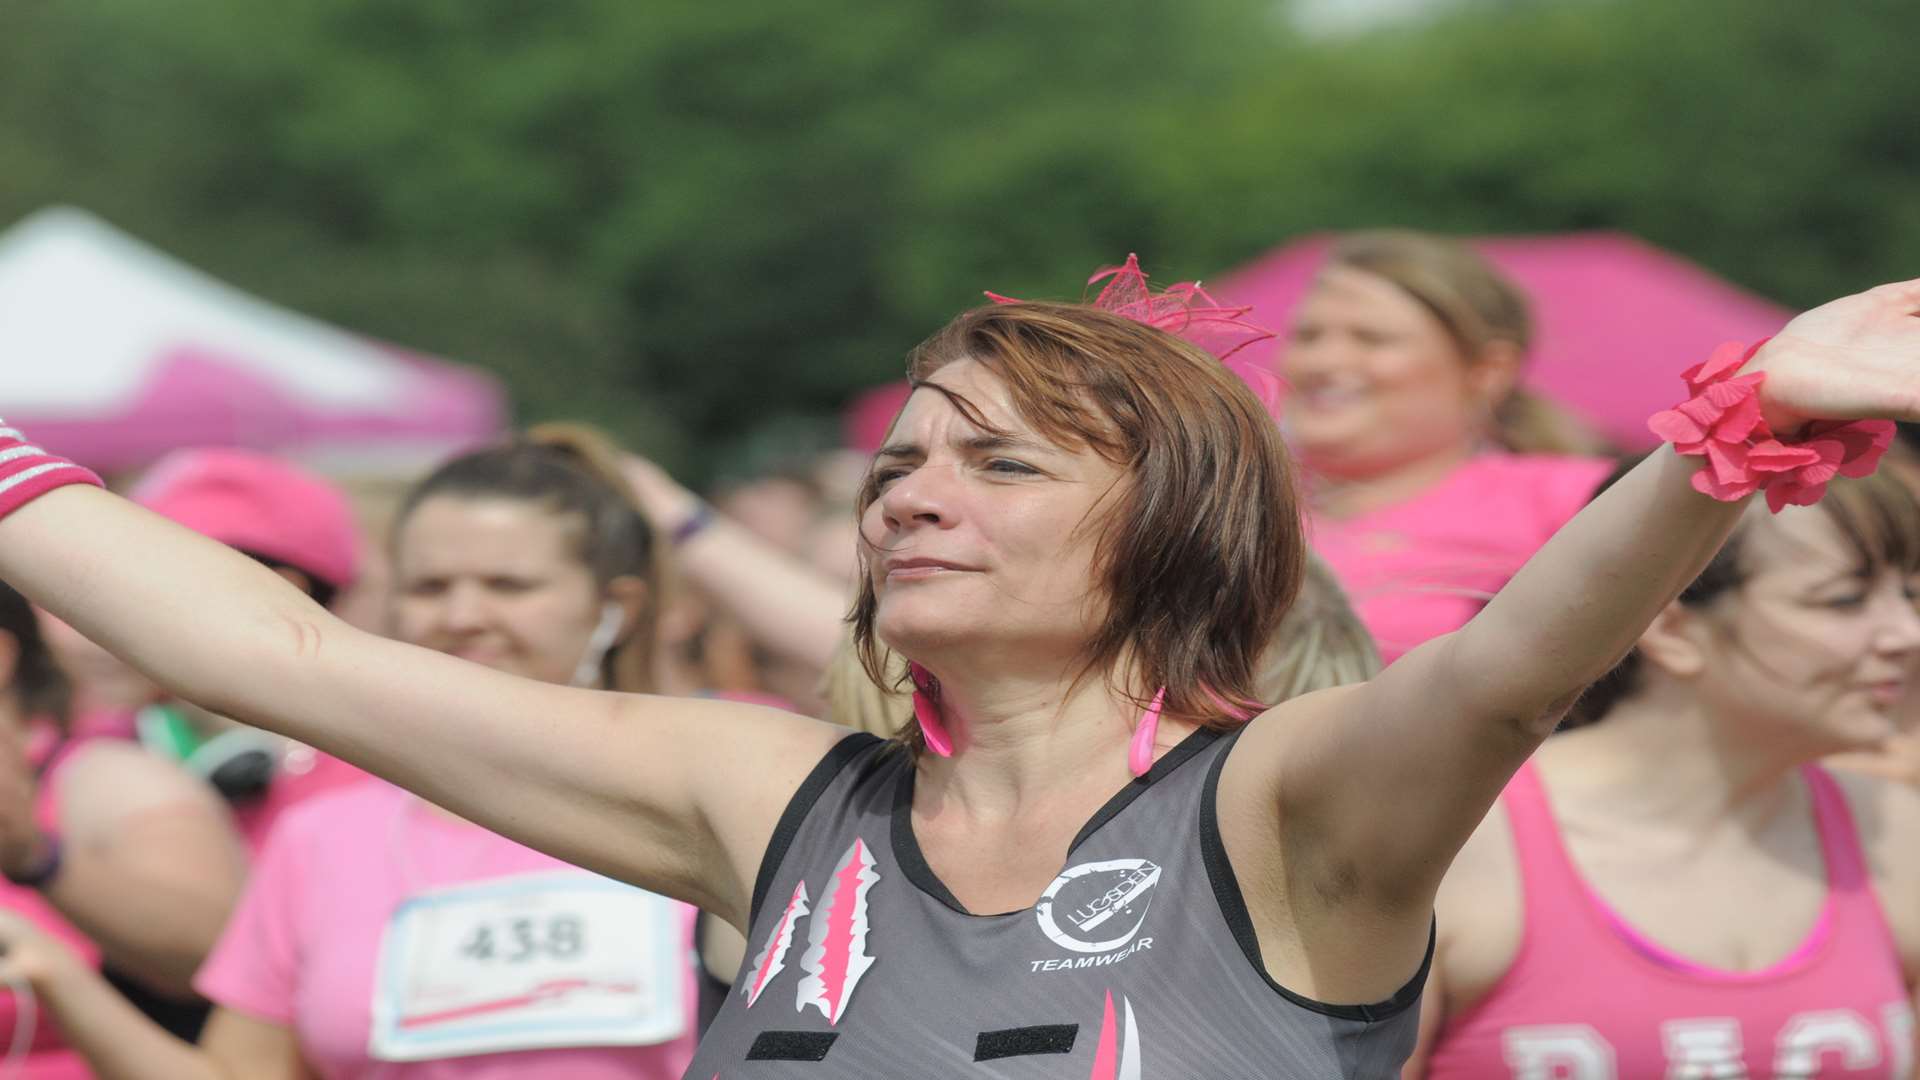 Race for Life at Mote Park, Maidstone last year